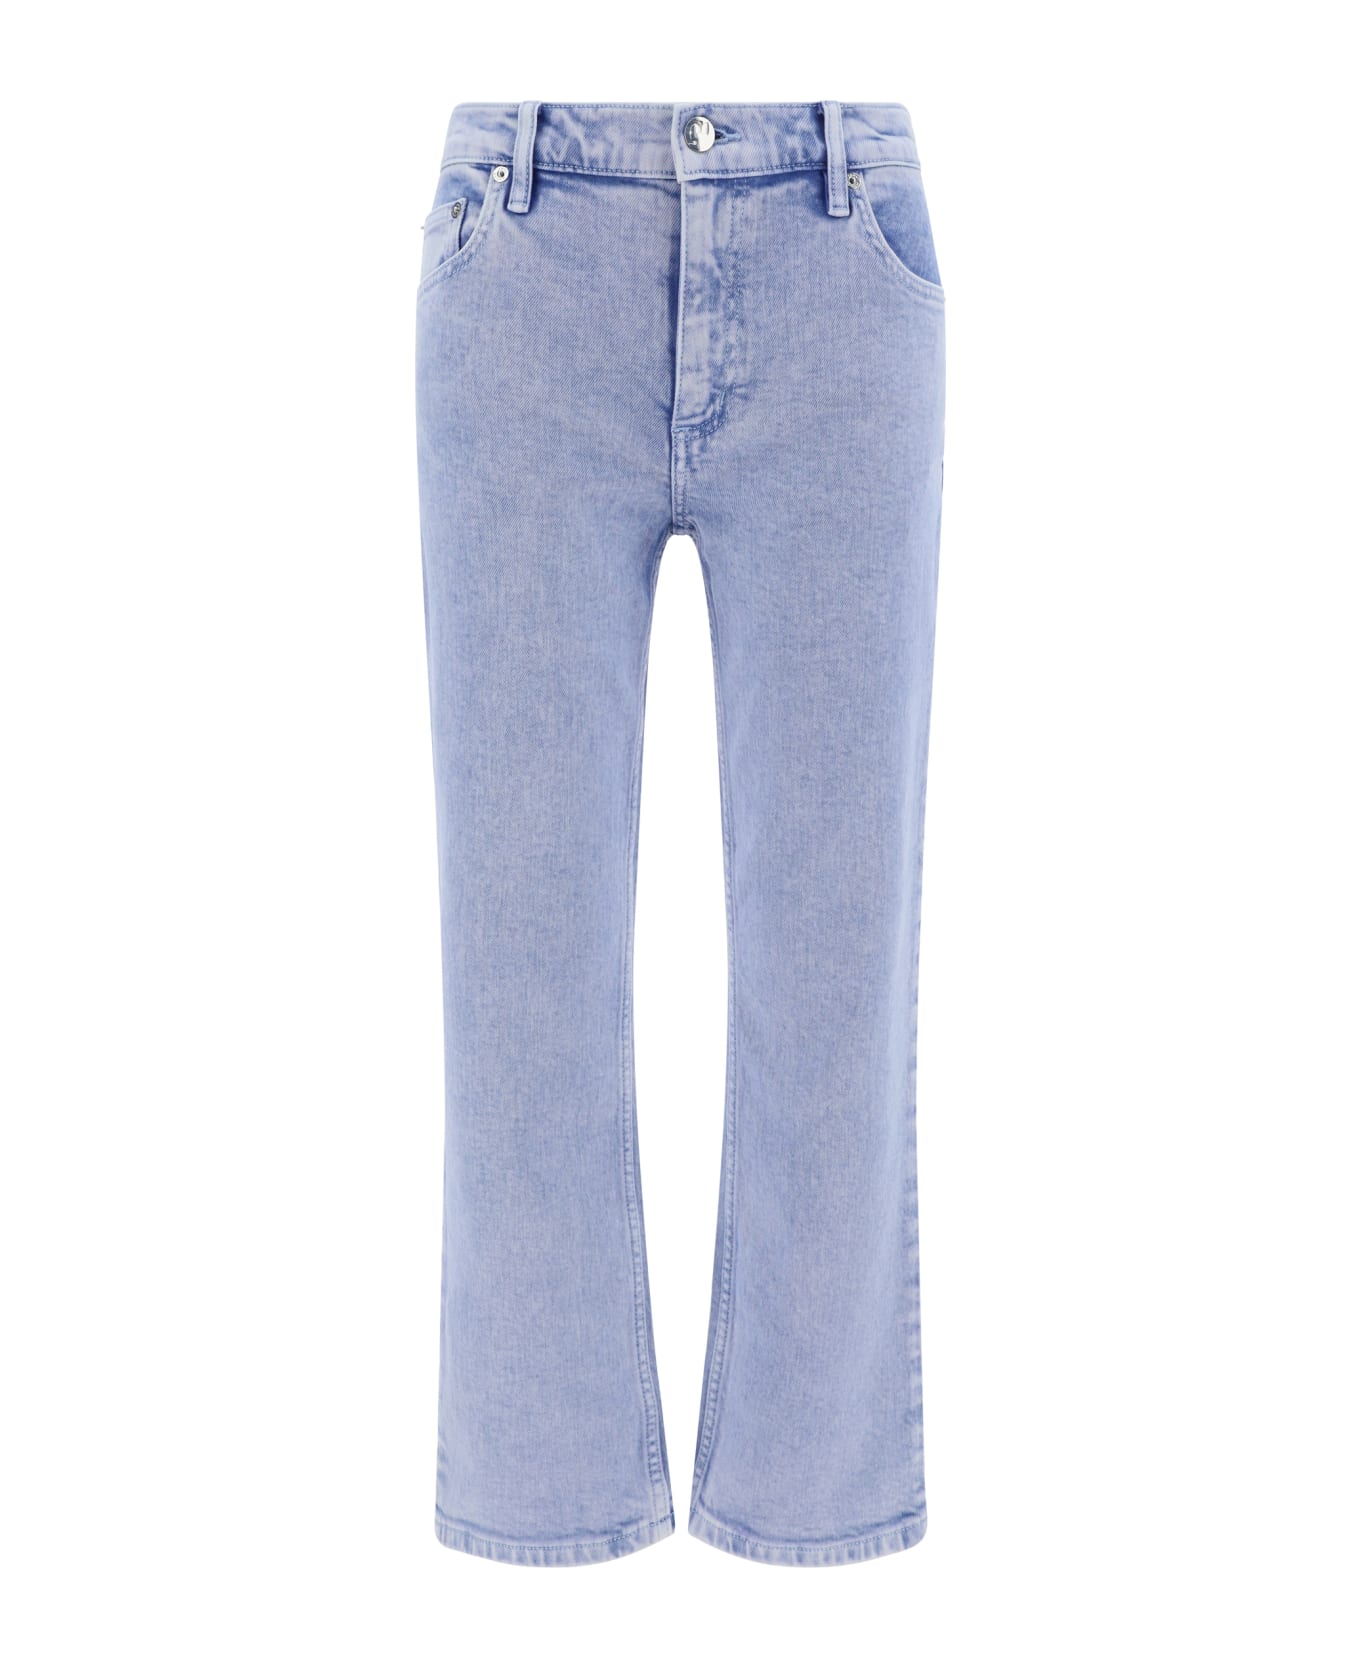 Tory Burch Jeans - Ice Blue